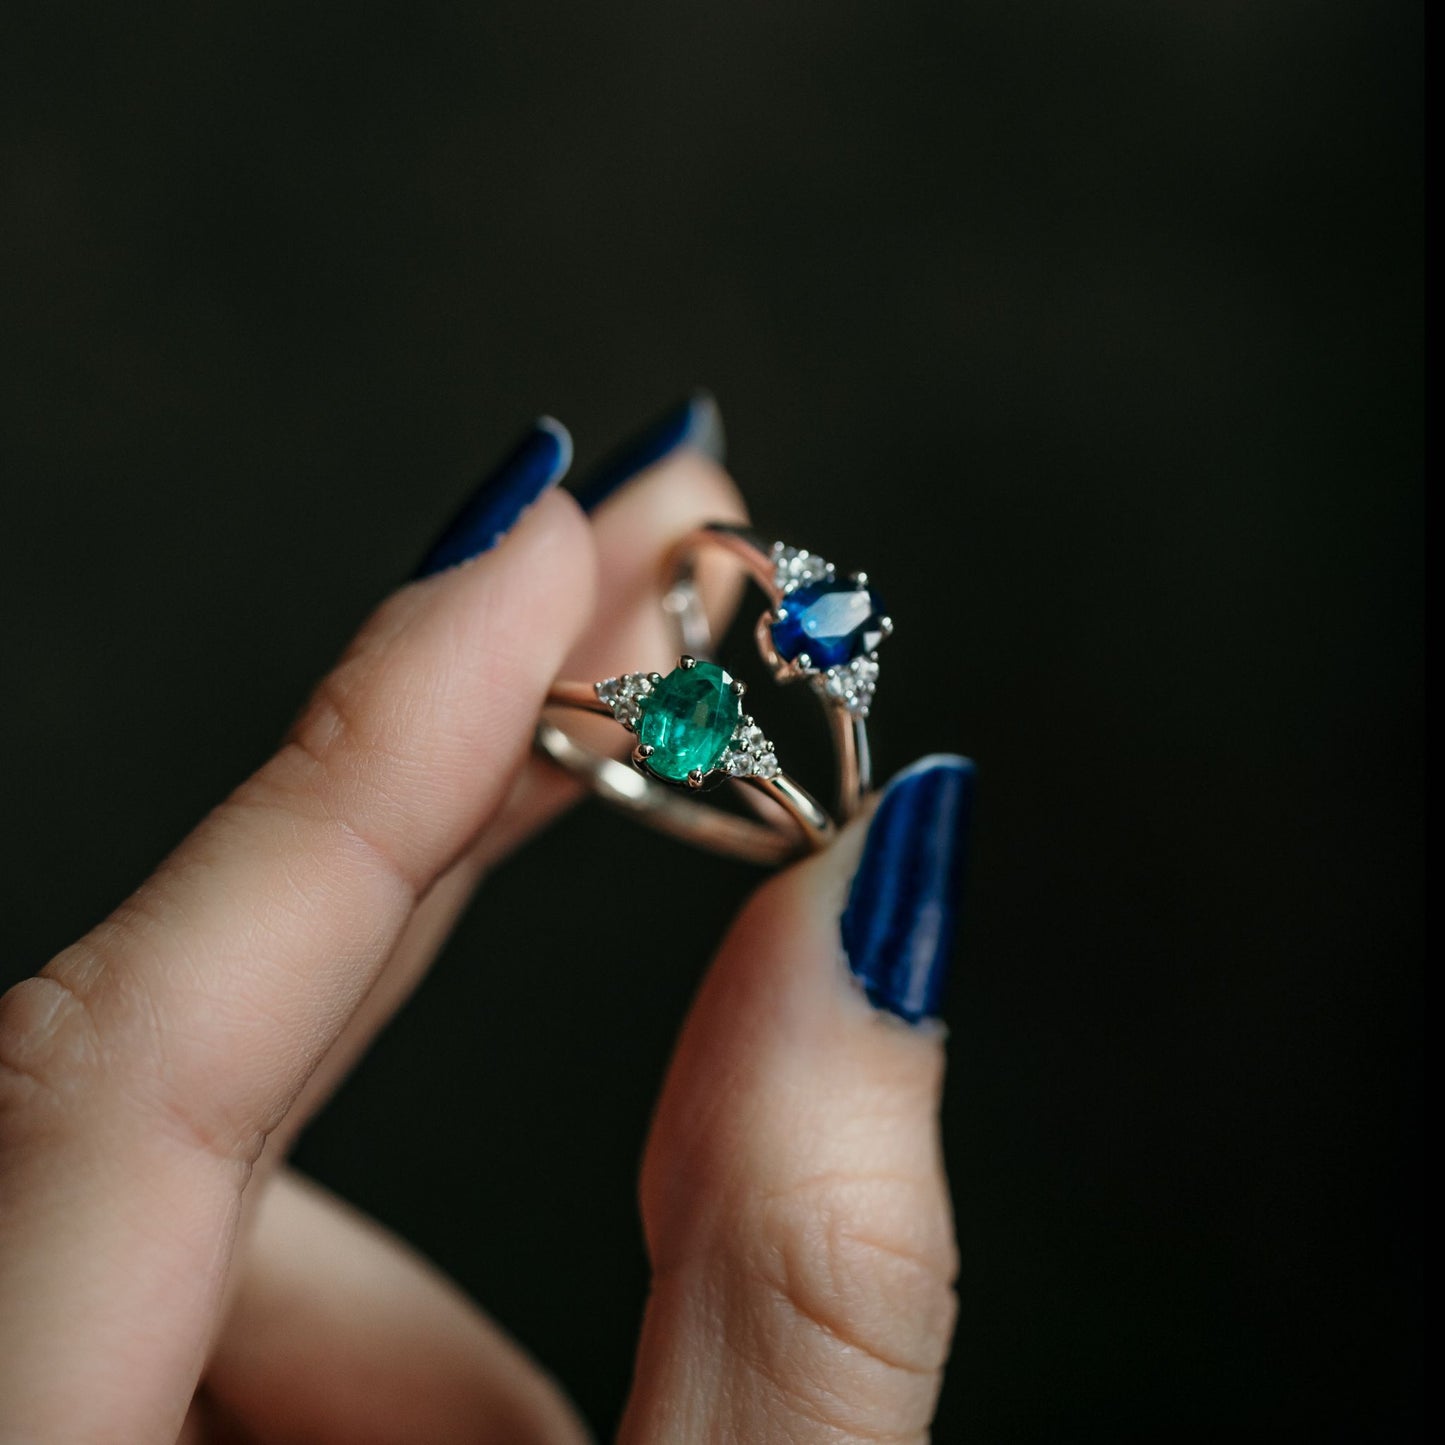 Sets of ashes ring Blue Sapphire and Emerald on white gold